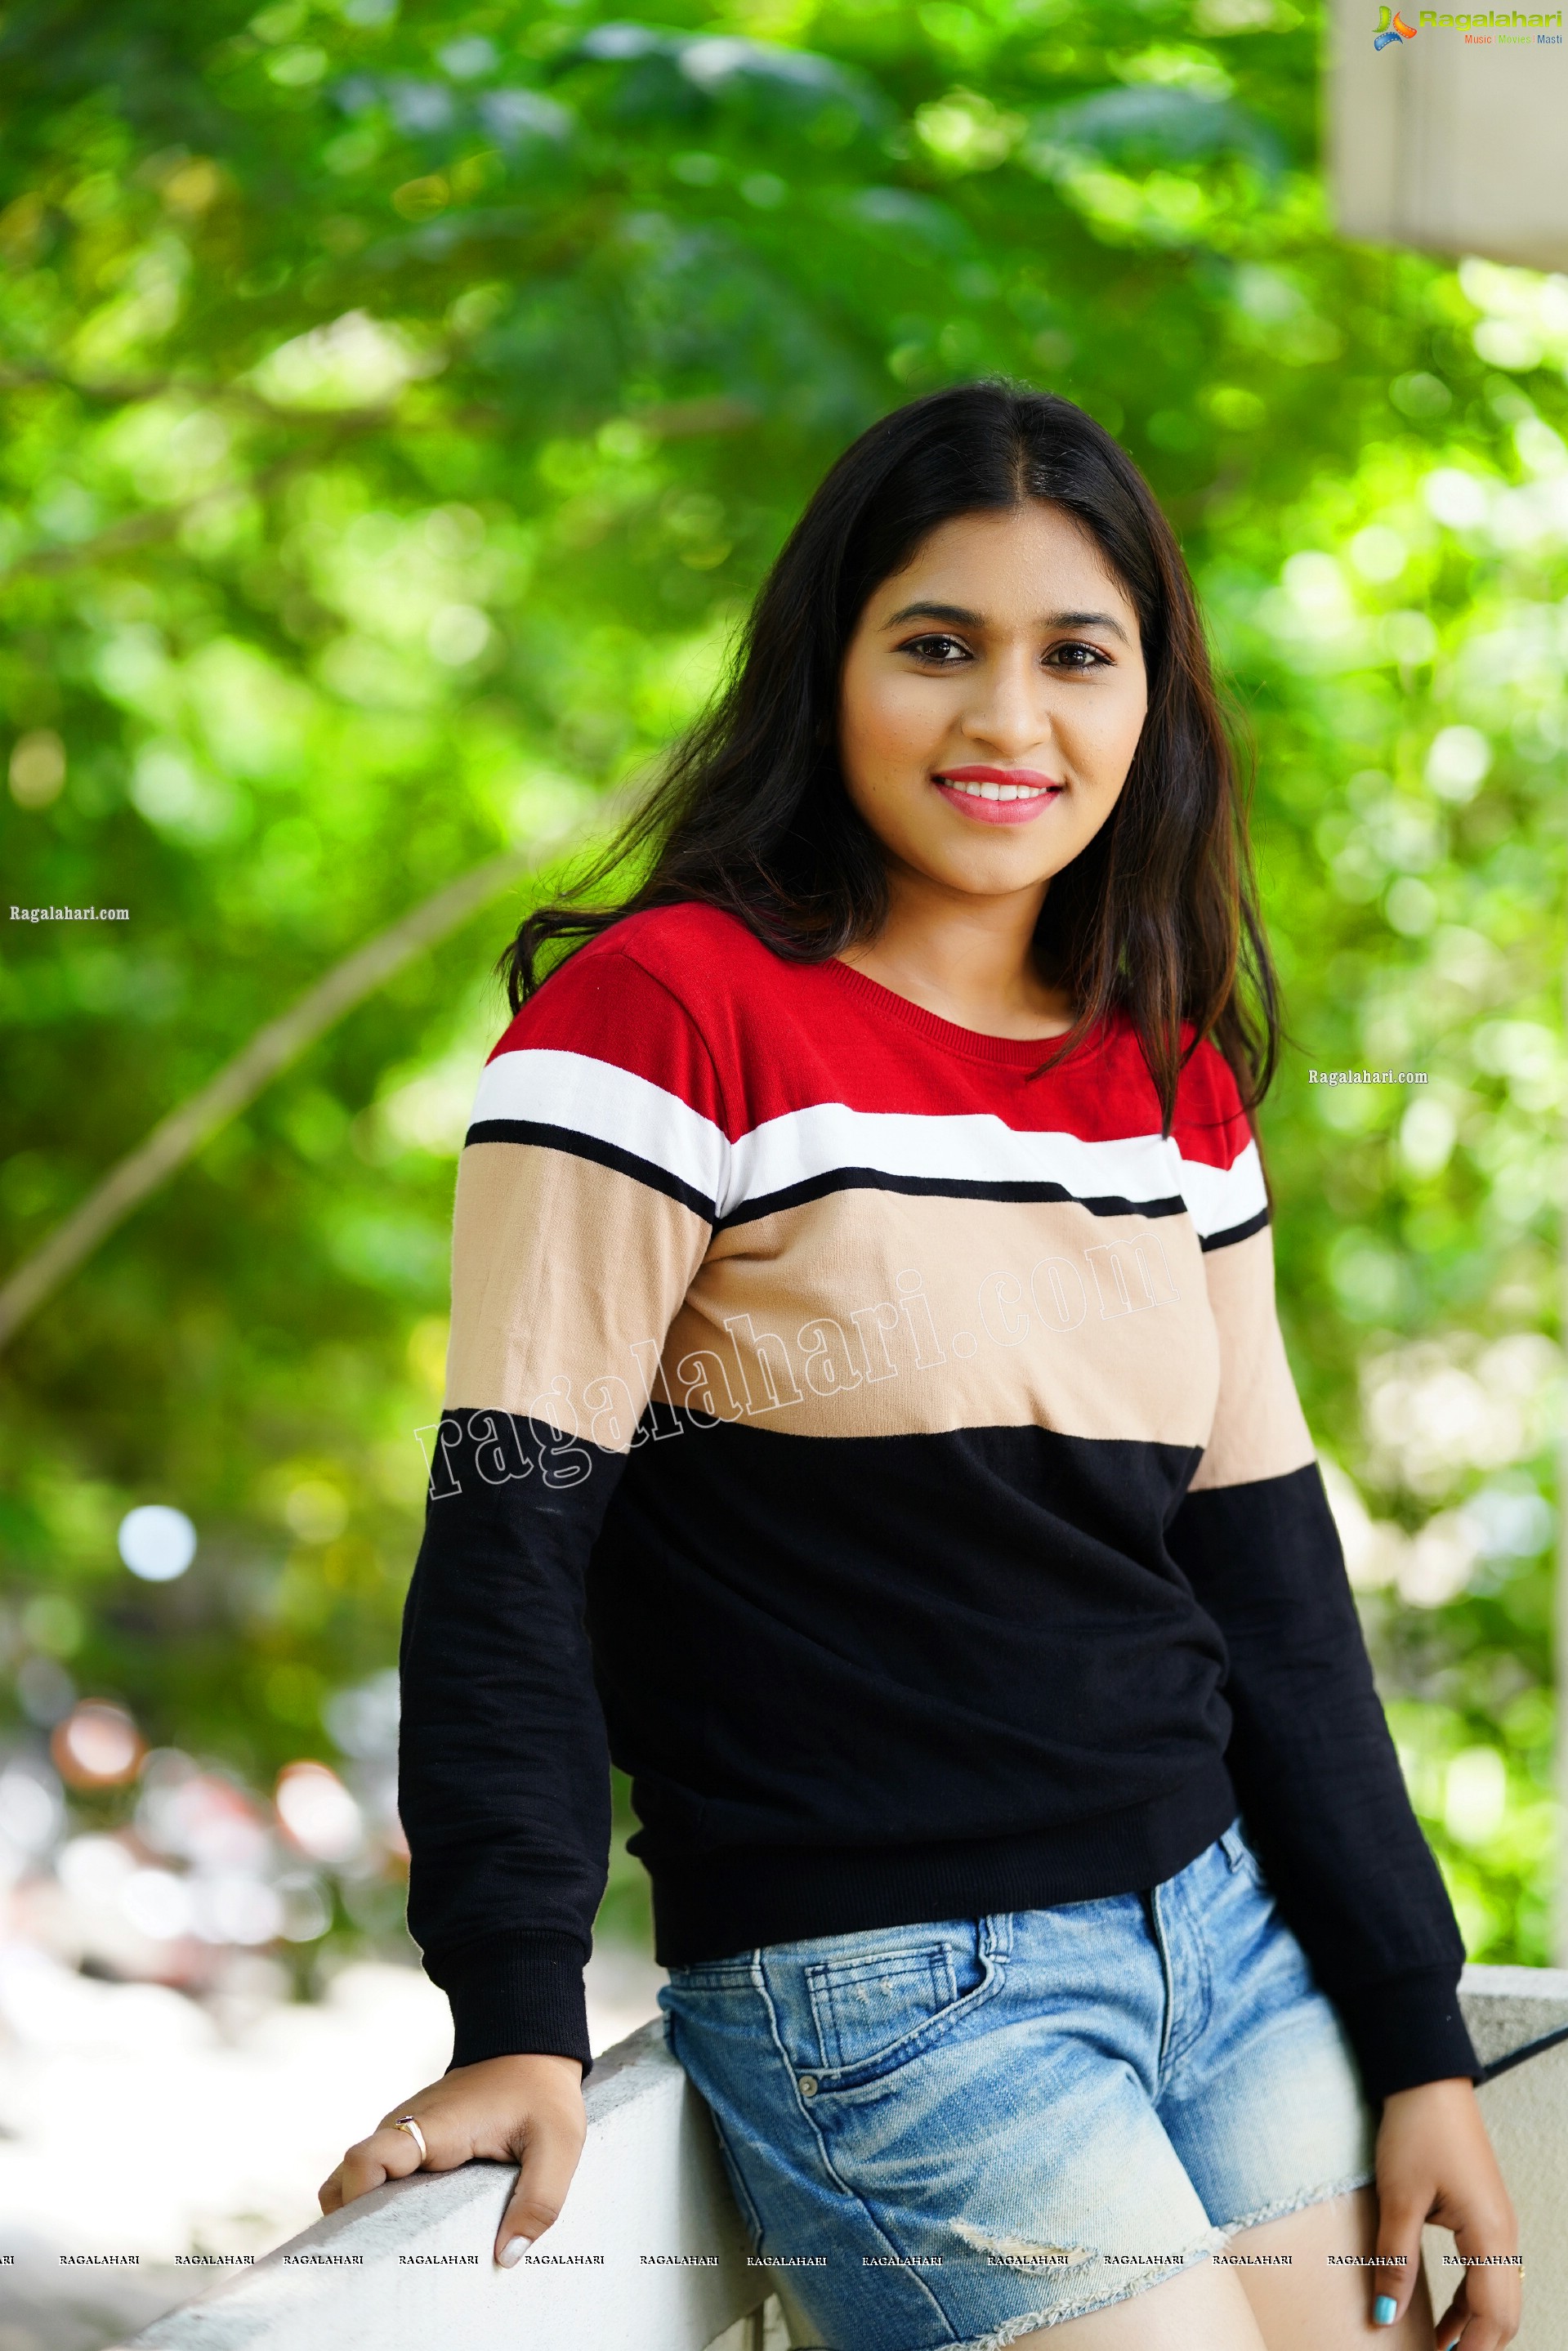 Honey Royal in Black and Red Checked Sweatshirt and Denim Shorts, Exclusive Photoshoot